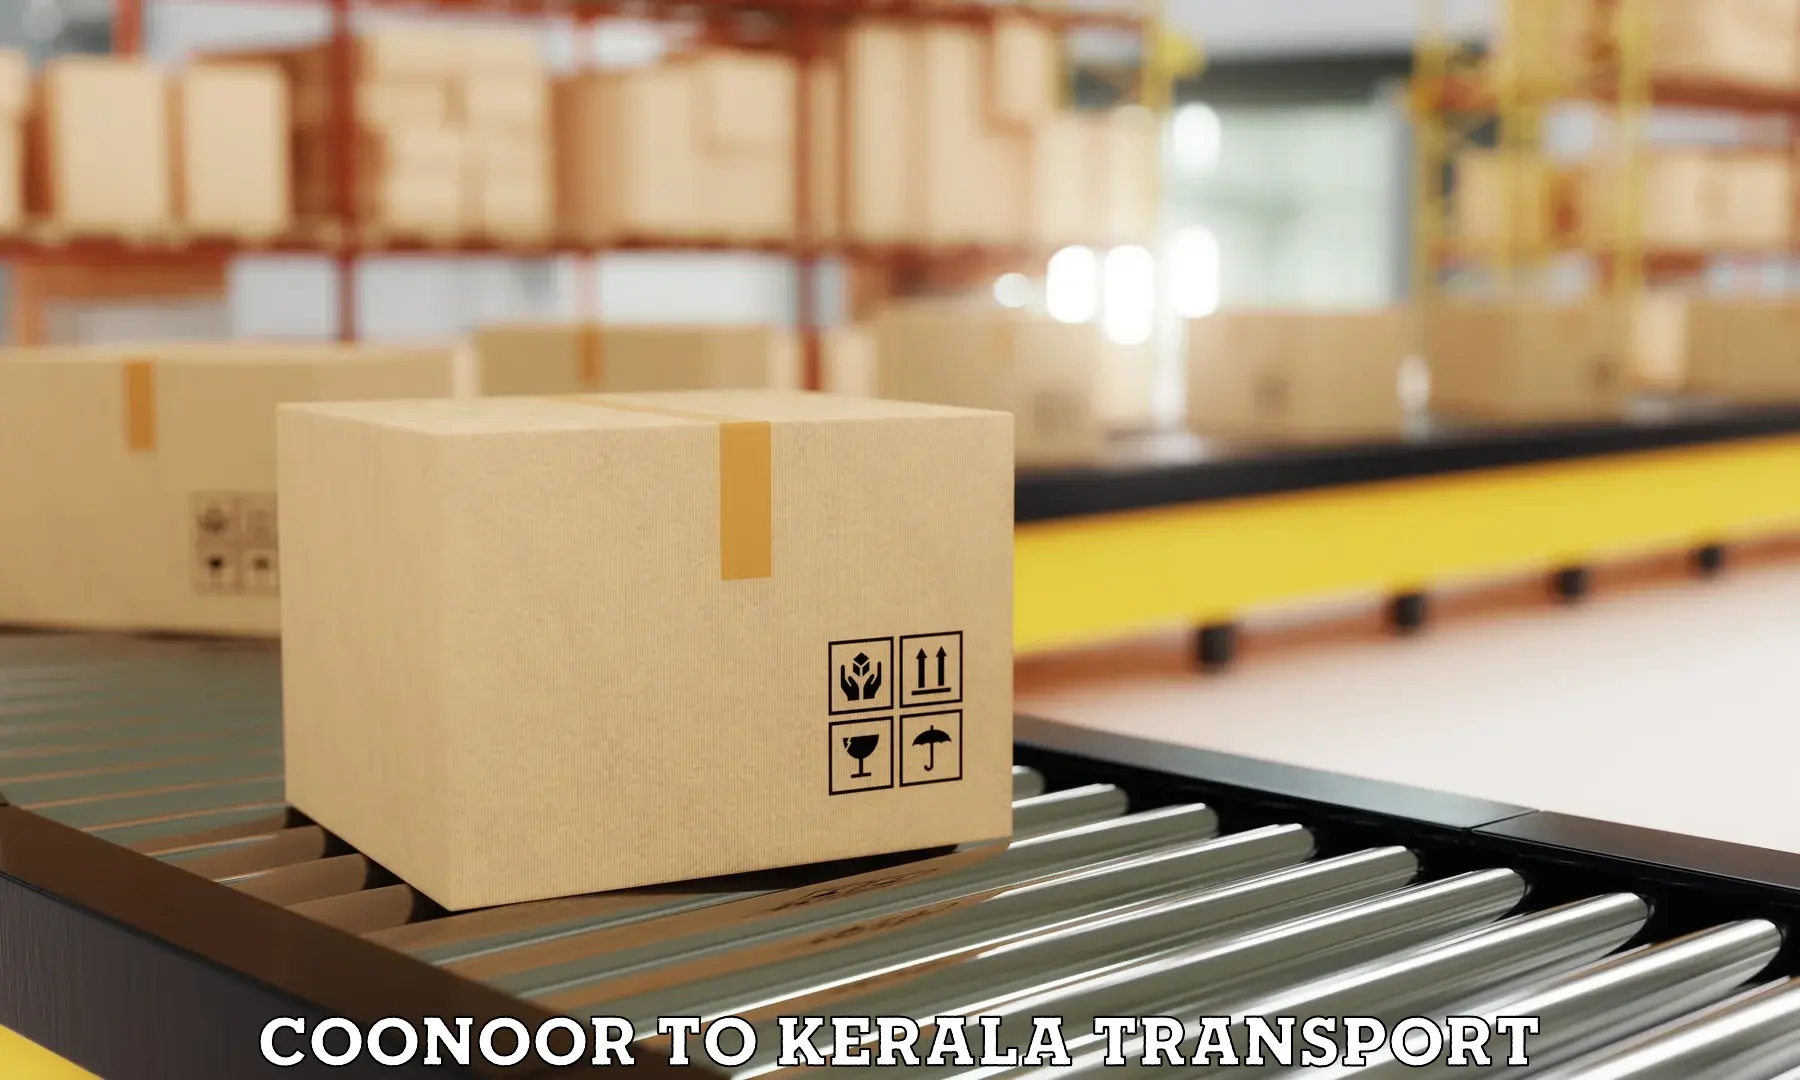 Daily parcel service transport Coonoor to Kerala